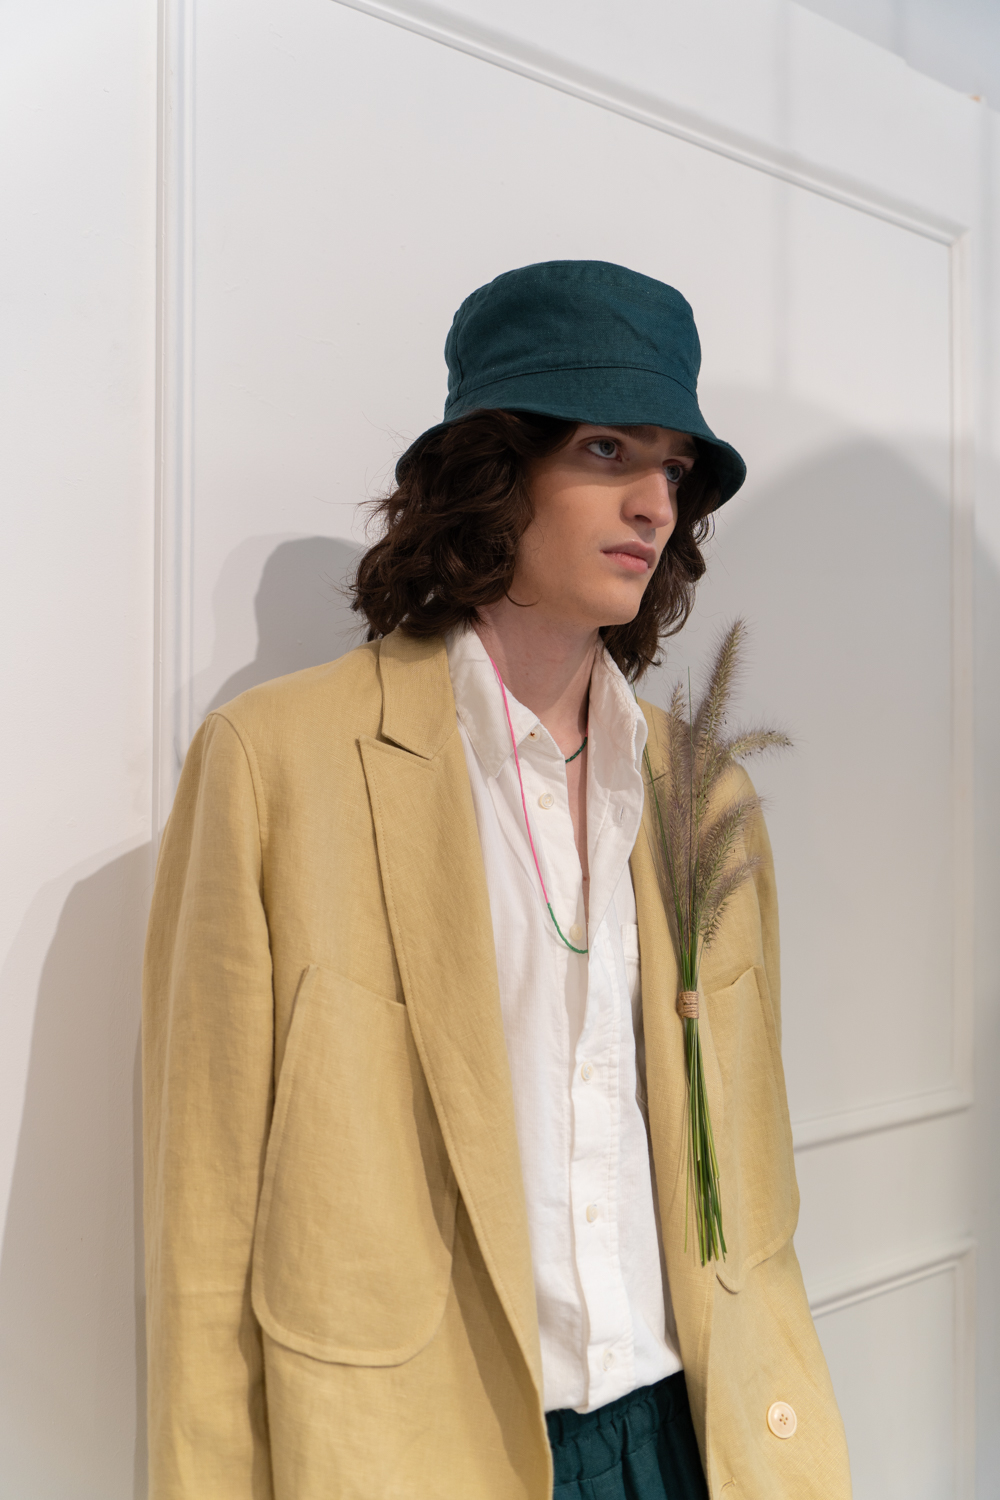 A model stands in a fashion showroom with white walls. The model is wearing a green bucket hat, a beige suit jacket, a white shirt and green pants from the brand thesalting. There is a small bouquet of foxtail attached to the jacket.